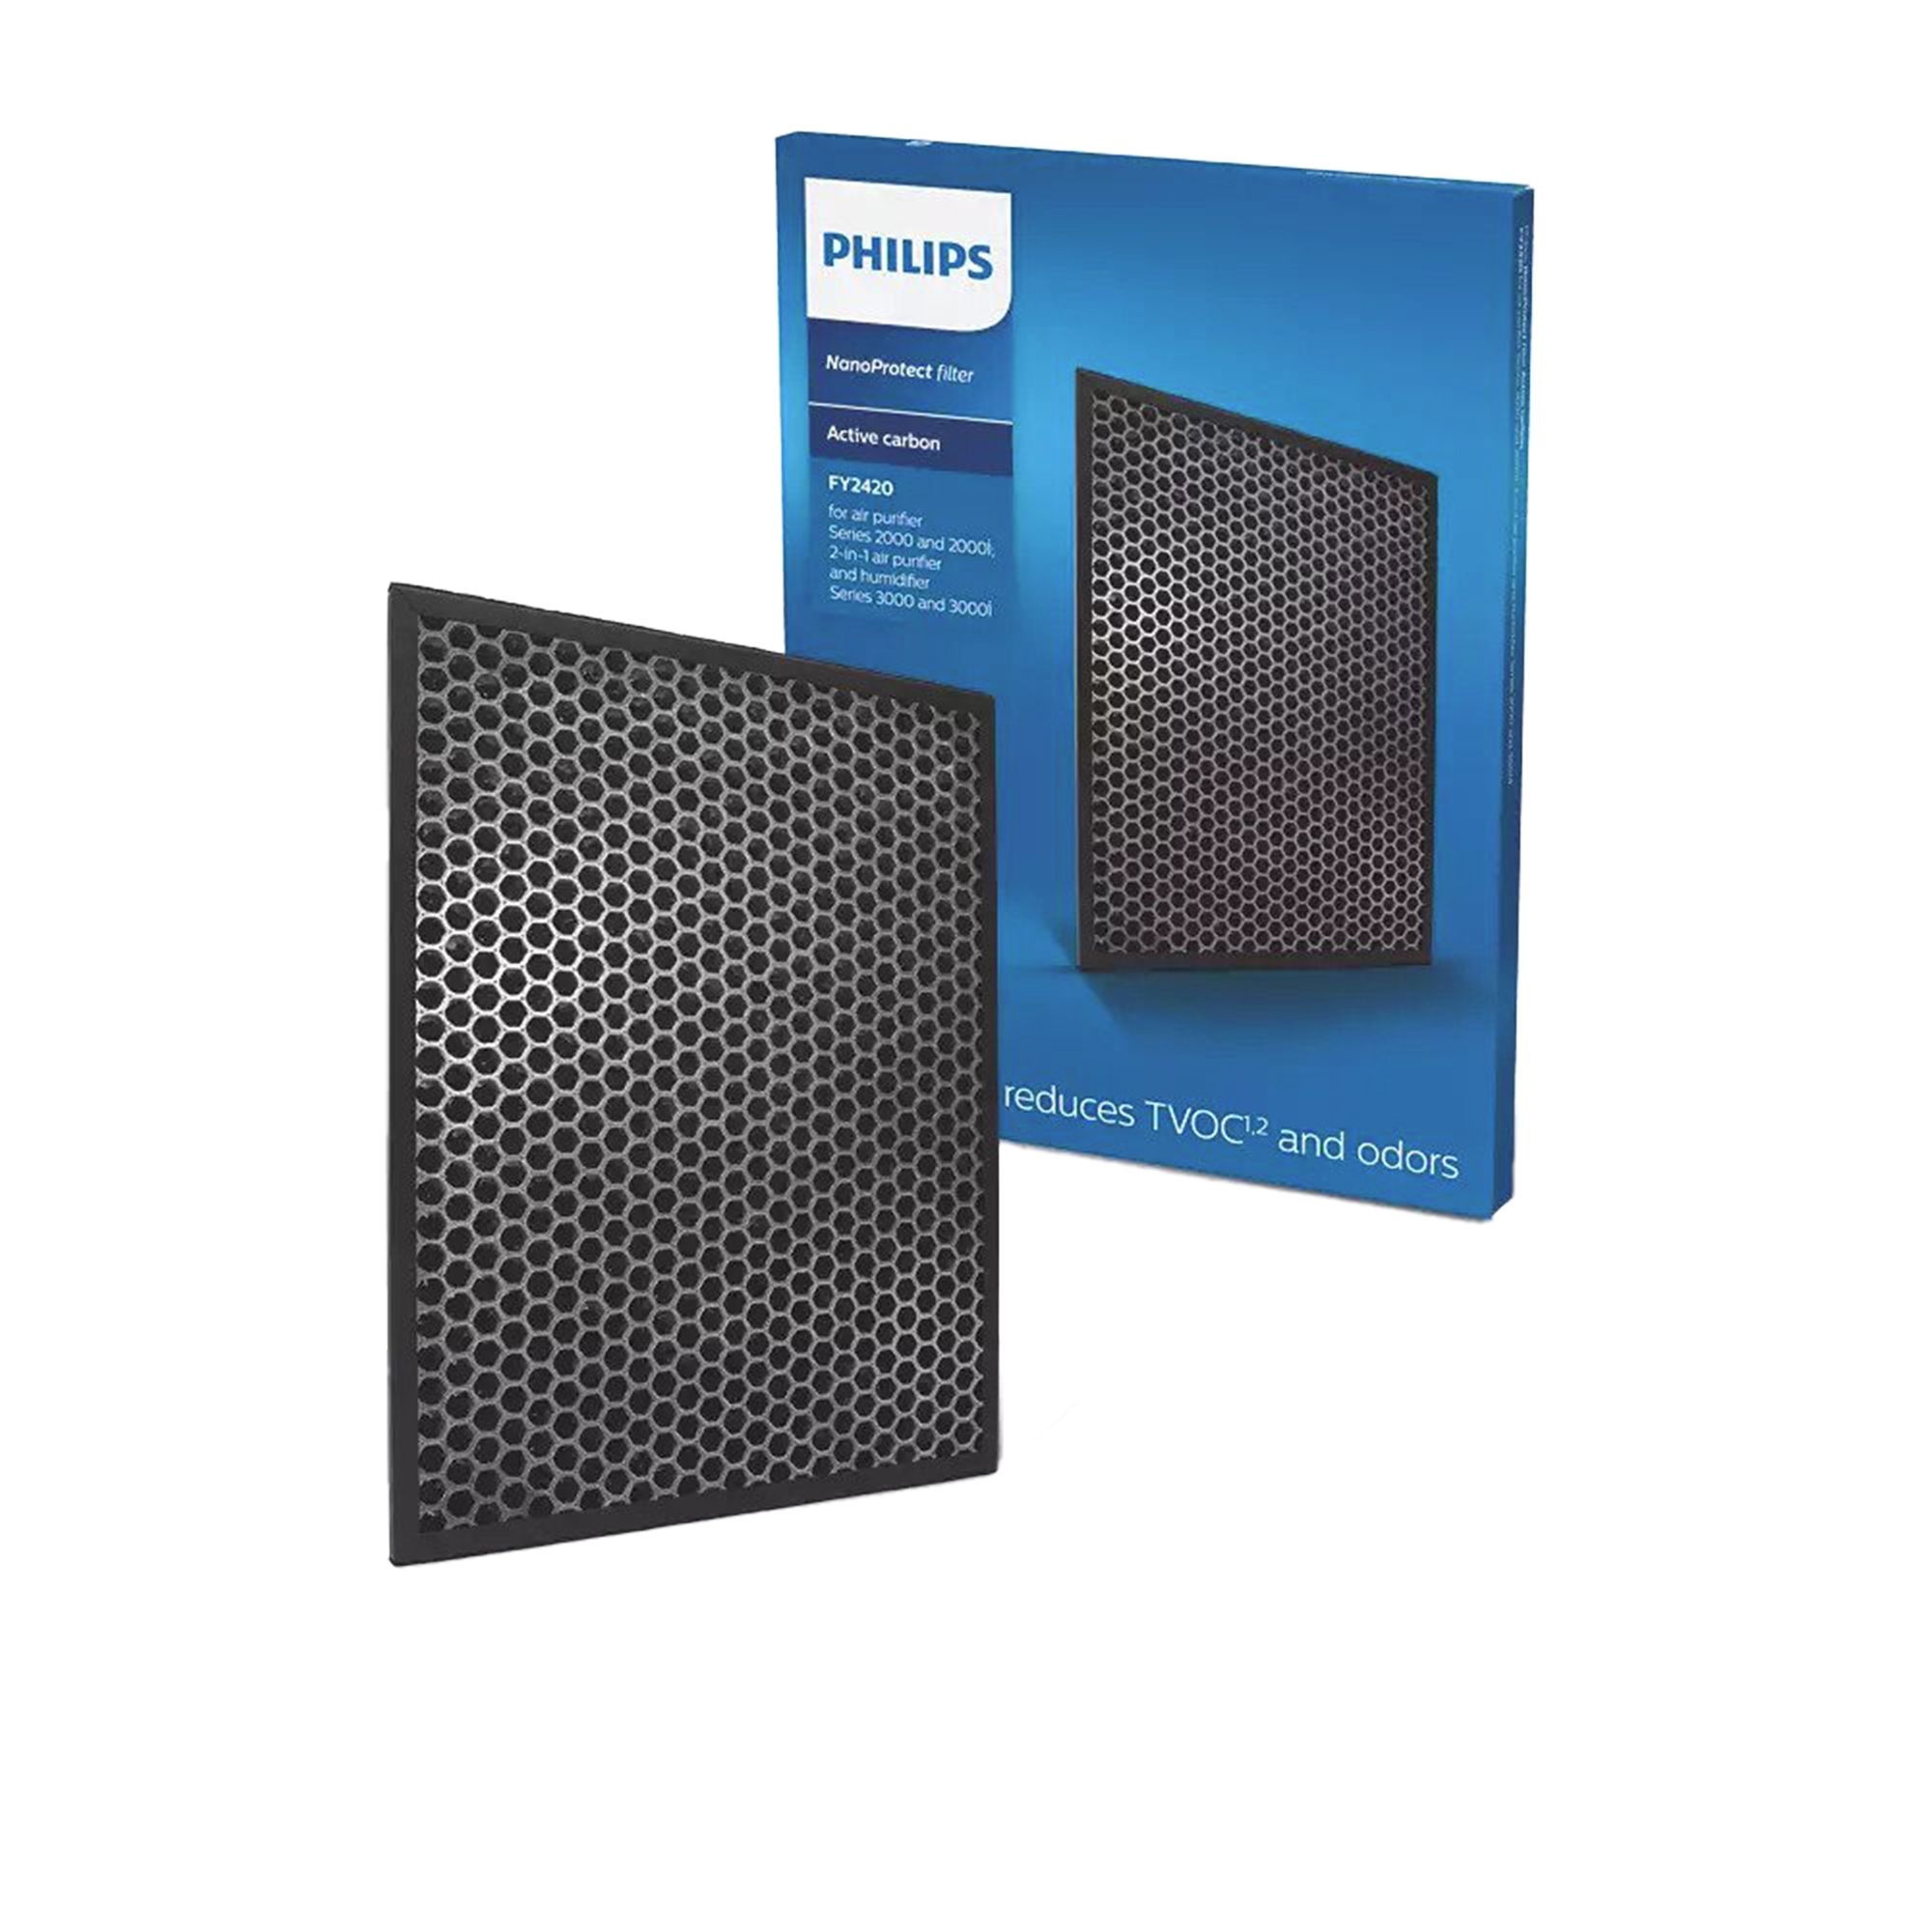 Philips NanoProtect 2000 Series AC Filter Replacement for AC2887/70 Image 2